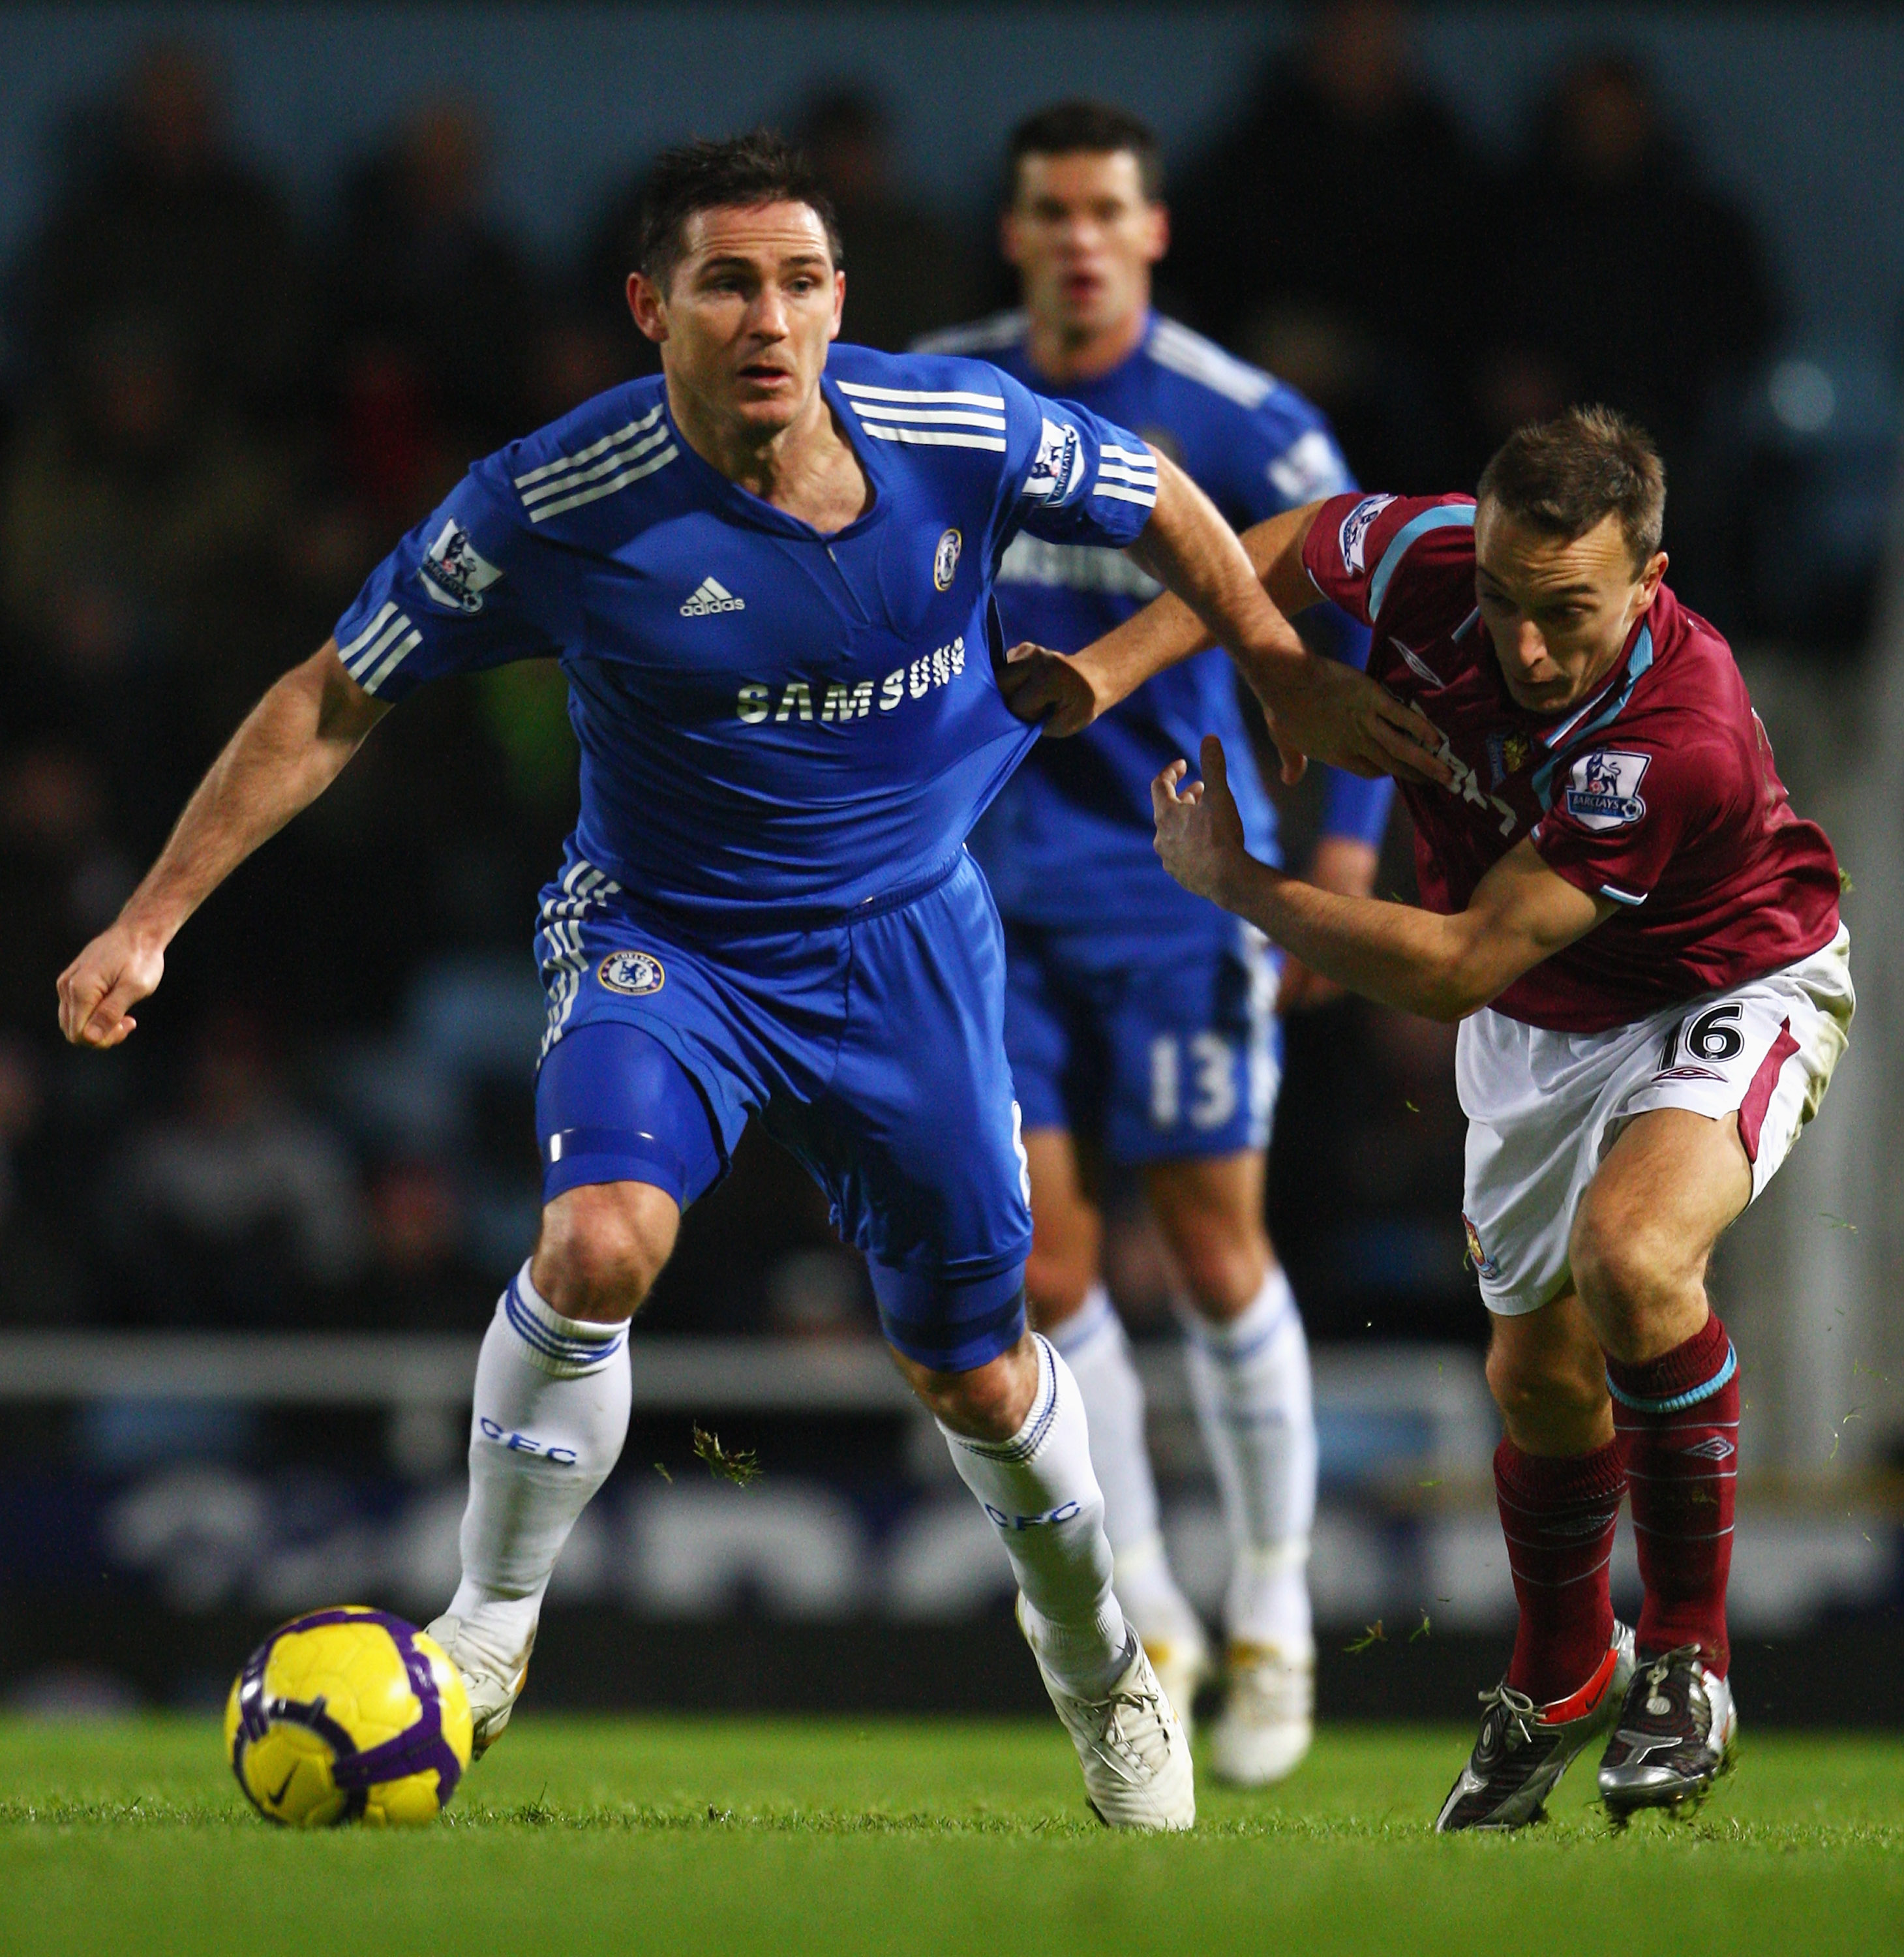 LONDON, ENGLAND - DECEMBER 20:  Frank Lampard of Chelsea is challenged by Mark Noble of West Ham United during the Barclays Premier League match between West Ham United and Chelsea at Upton Park on December 20, 2009 in London, England.  (Photo by Phil Col